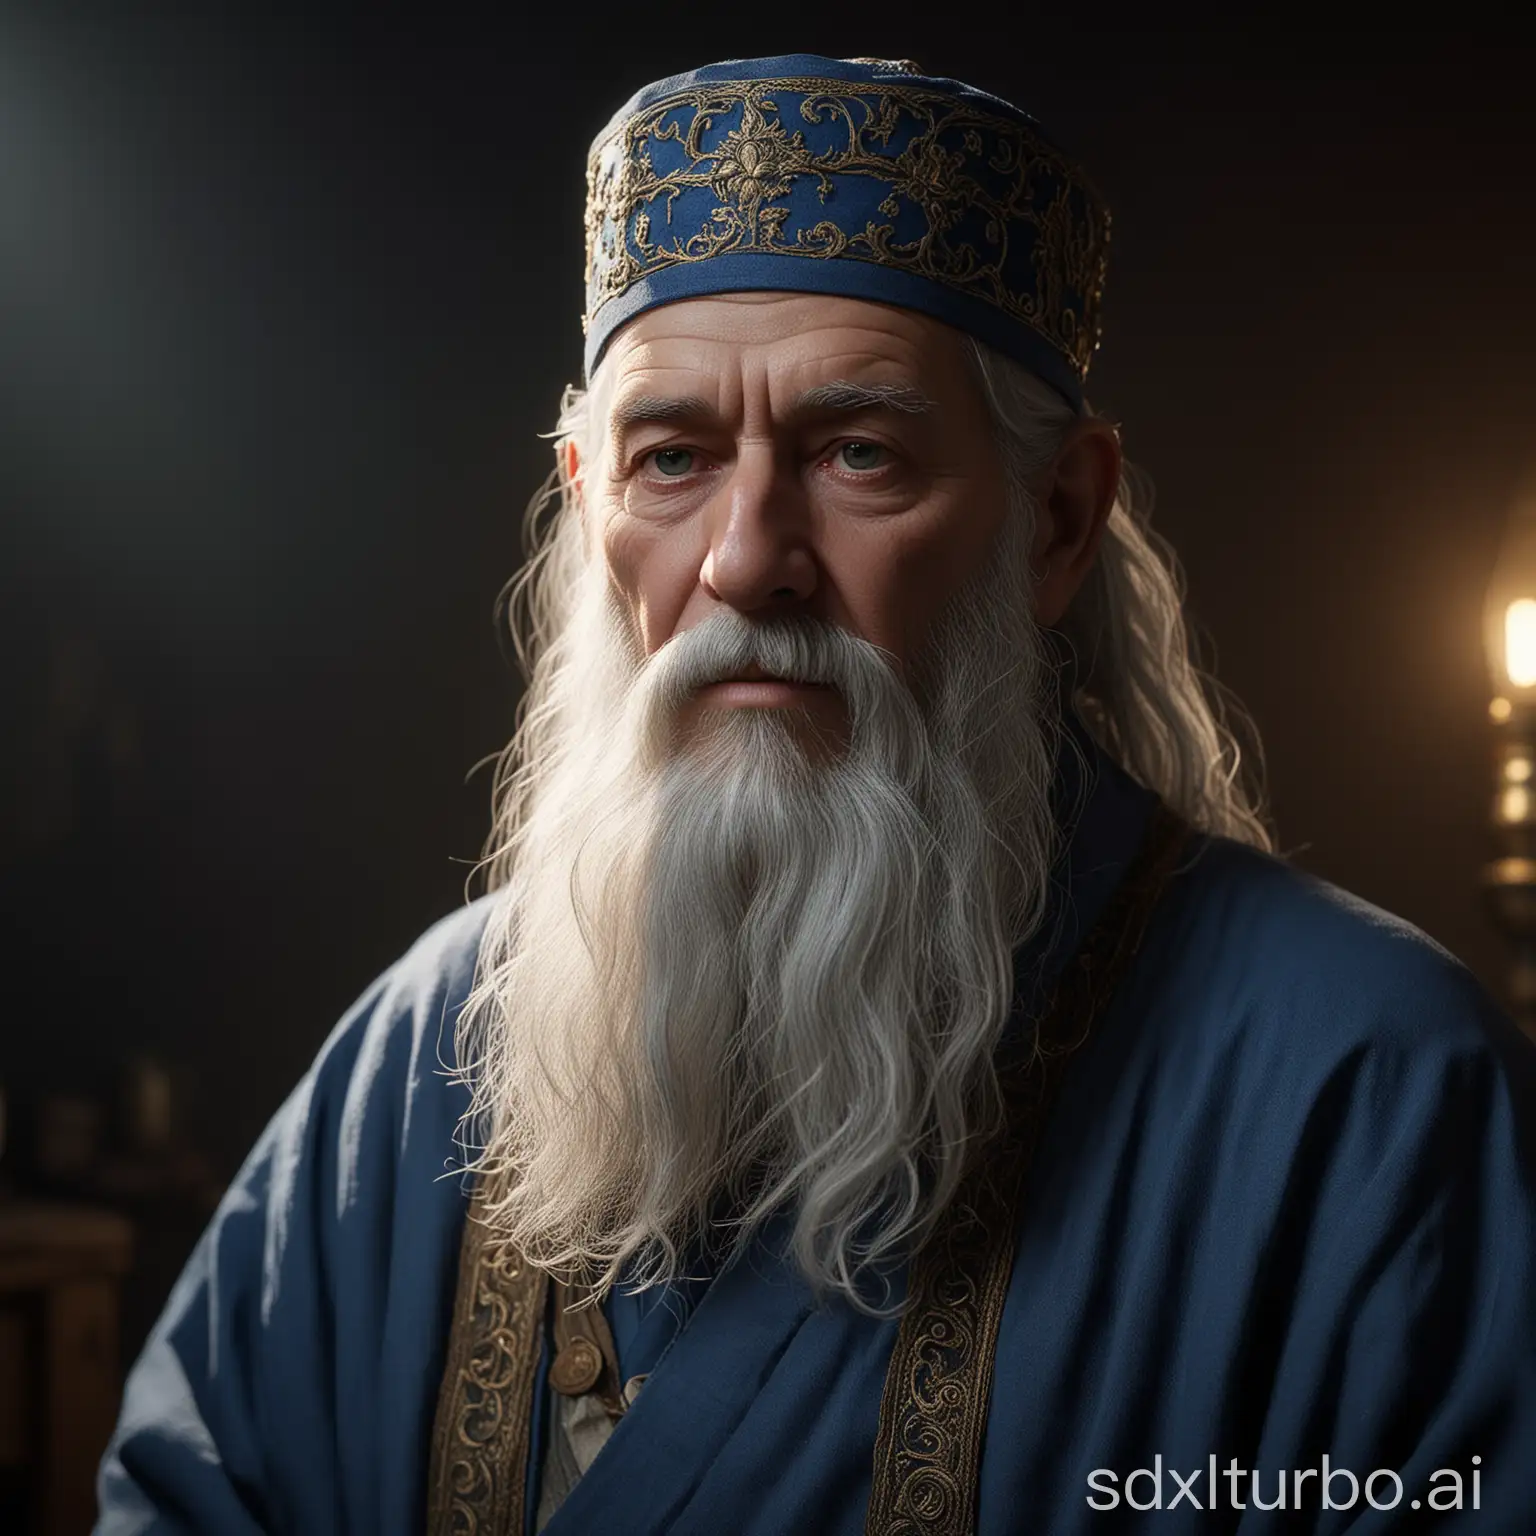 an elderly man with gray hair and long beard  ,  dressed in blue robe and Dharma hat from the time of Middle Ages, Cinematic lighting, Unreal Engine 5, Cinematic, Color Grading, Editorial Photography, Photography, Photoshoot, Shot on 70mm lens, Depth of Field, DOF, Tilt Blur, Shutter Speed 1/1000, F/22, White Balance, 32k, Super-Resolution, Megapixel, ProPhoto RGB, VR, tall, epic, artgerm, alex ross, Halfrear Lighting, Backlight, Natural Lighting, Incandescent, Optical Fiber, Moody Lighting, Cinematic Lighting, Studio Lighting, Soft Lighting, Volumetric, Contre-Jour, dark lighting, Accent Lighting, Global Illumination, Screen Space Global Illumination, Ray Tracing Global Illumination, Red Rim light, cool color grading 45%,